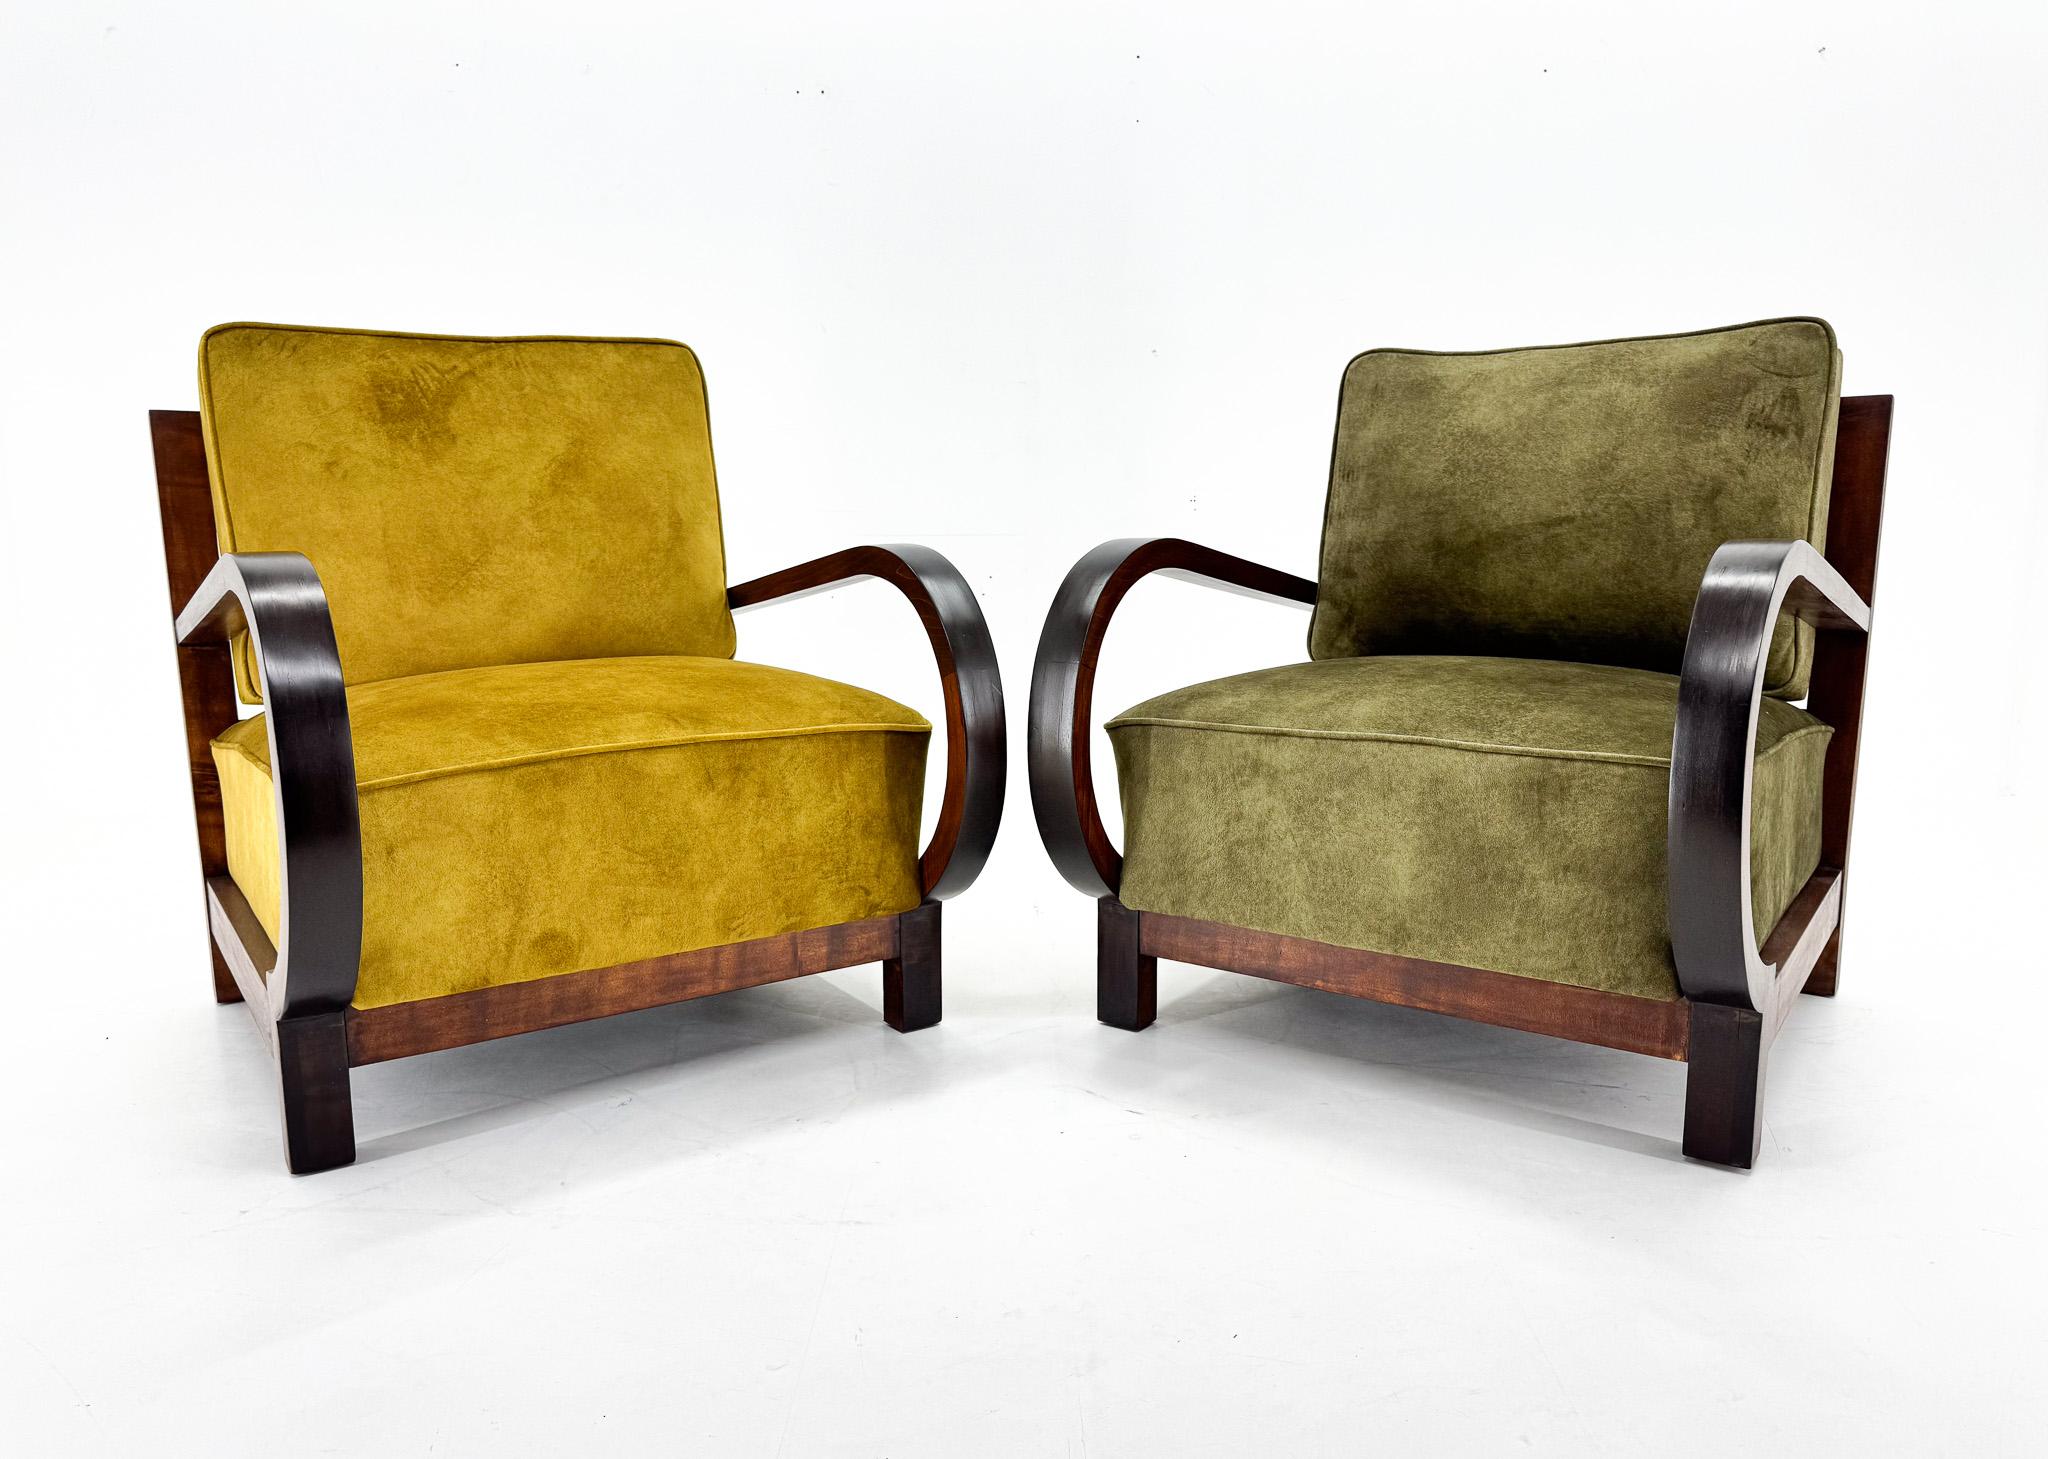 Czech Pair of Art Deco Beech Wood Armchairs, 1930's, Newly Upholstered For Sale